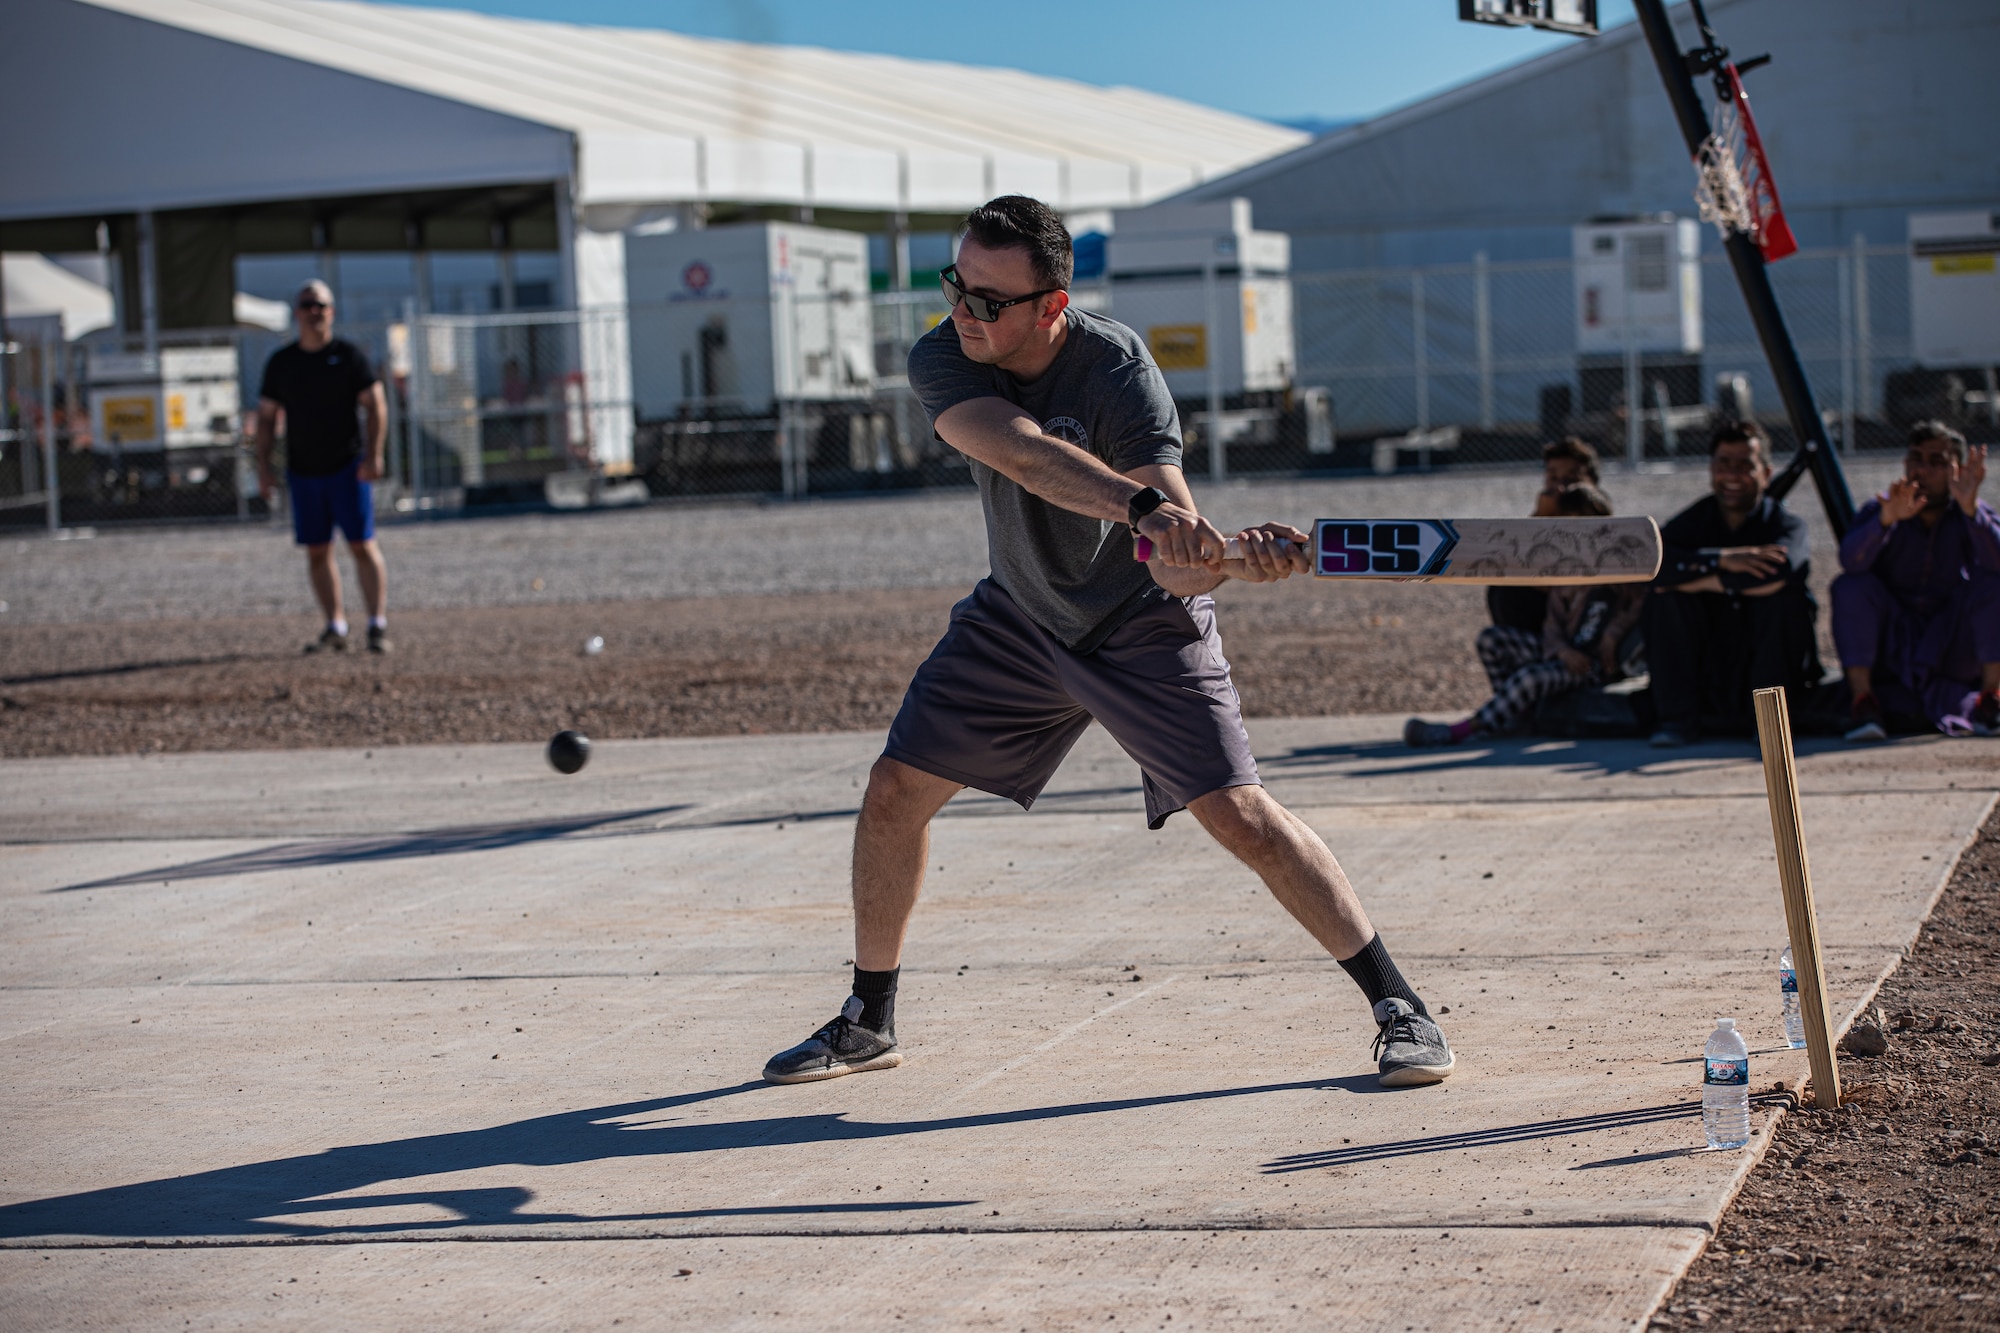 Capt. Daniel Rubio, Task Force-Holloman public affairs officer deployed from Laughlin Air Force Base, Texas, bats during a cricket game between U.S. service members and Afghan evacuees at Aman Omid Village on Holloman Air Force Base, New Mexico, Oct. 9, 2021. The Department of Defense, through U.S. Northern Command, and in support of the Department of Homeland Security, is providing transportation, temporary housing, medical screening, and general support for at least 50,000 Afghan evacuees at suitable facilities, in permanent or temporary structures, as quickly as possible. This initiative provides Afghan personnel essential support at secure locations outside Afghanistan. (U.S. Army photo by Pfc. Anthony Sanchez)